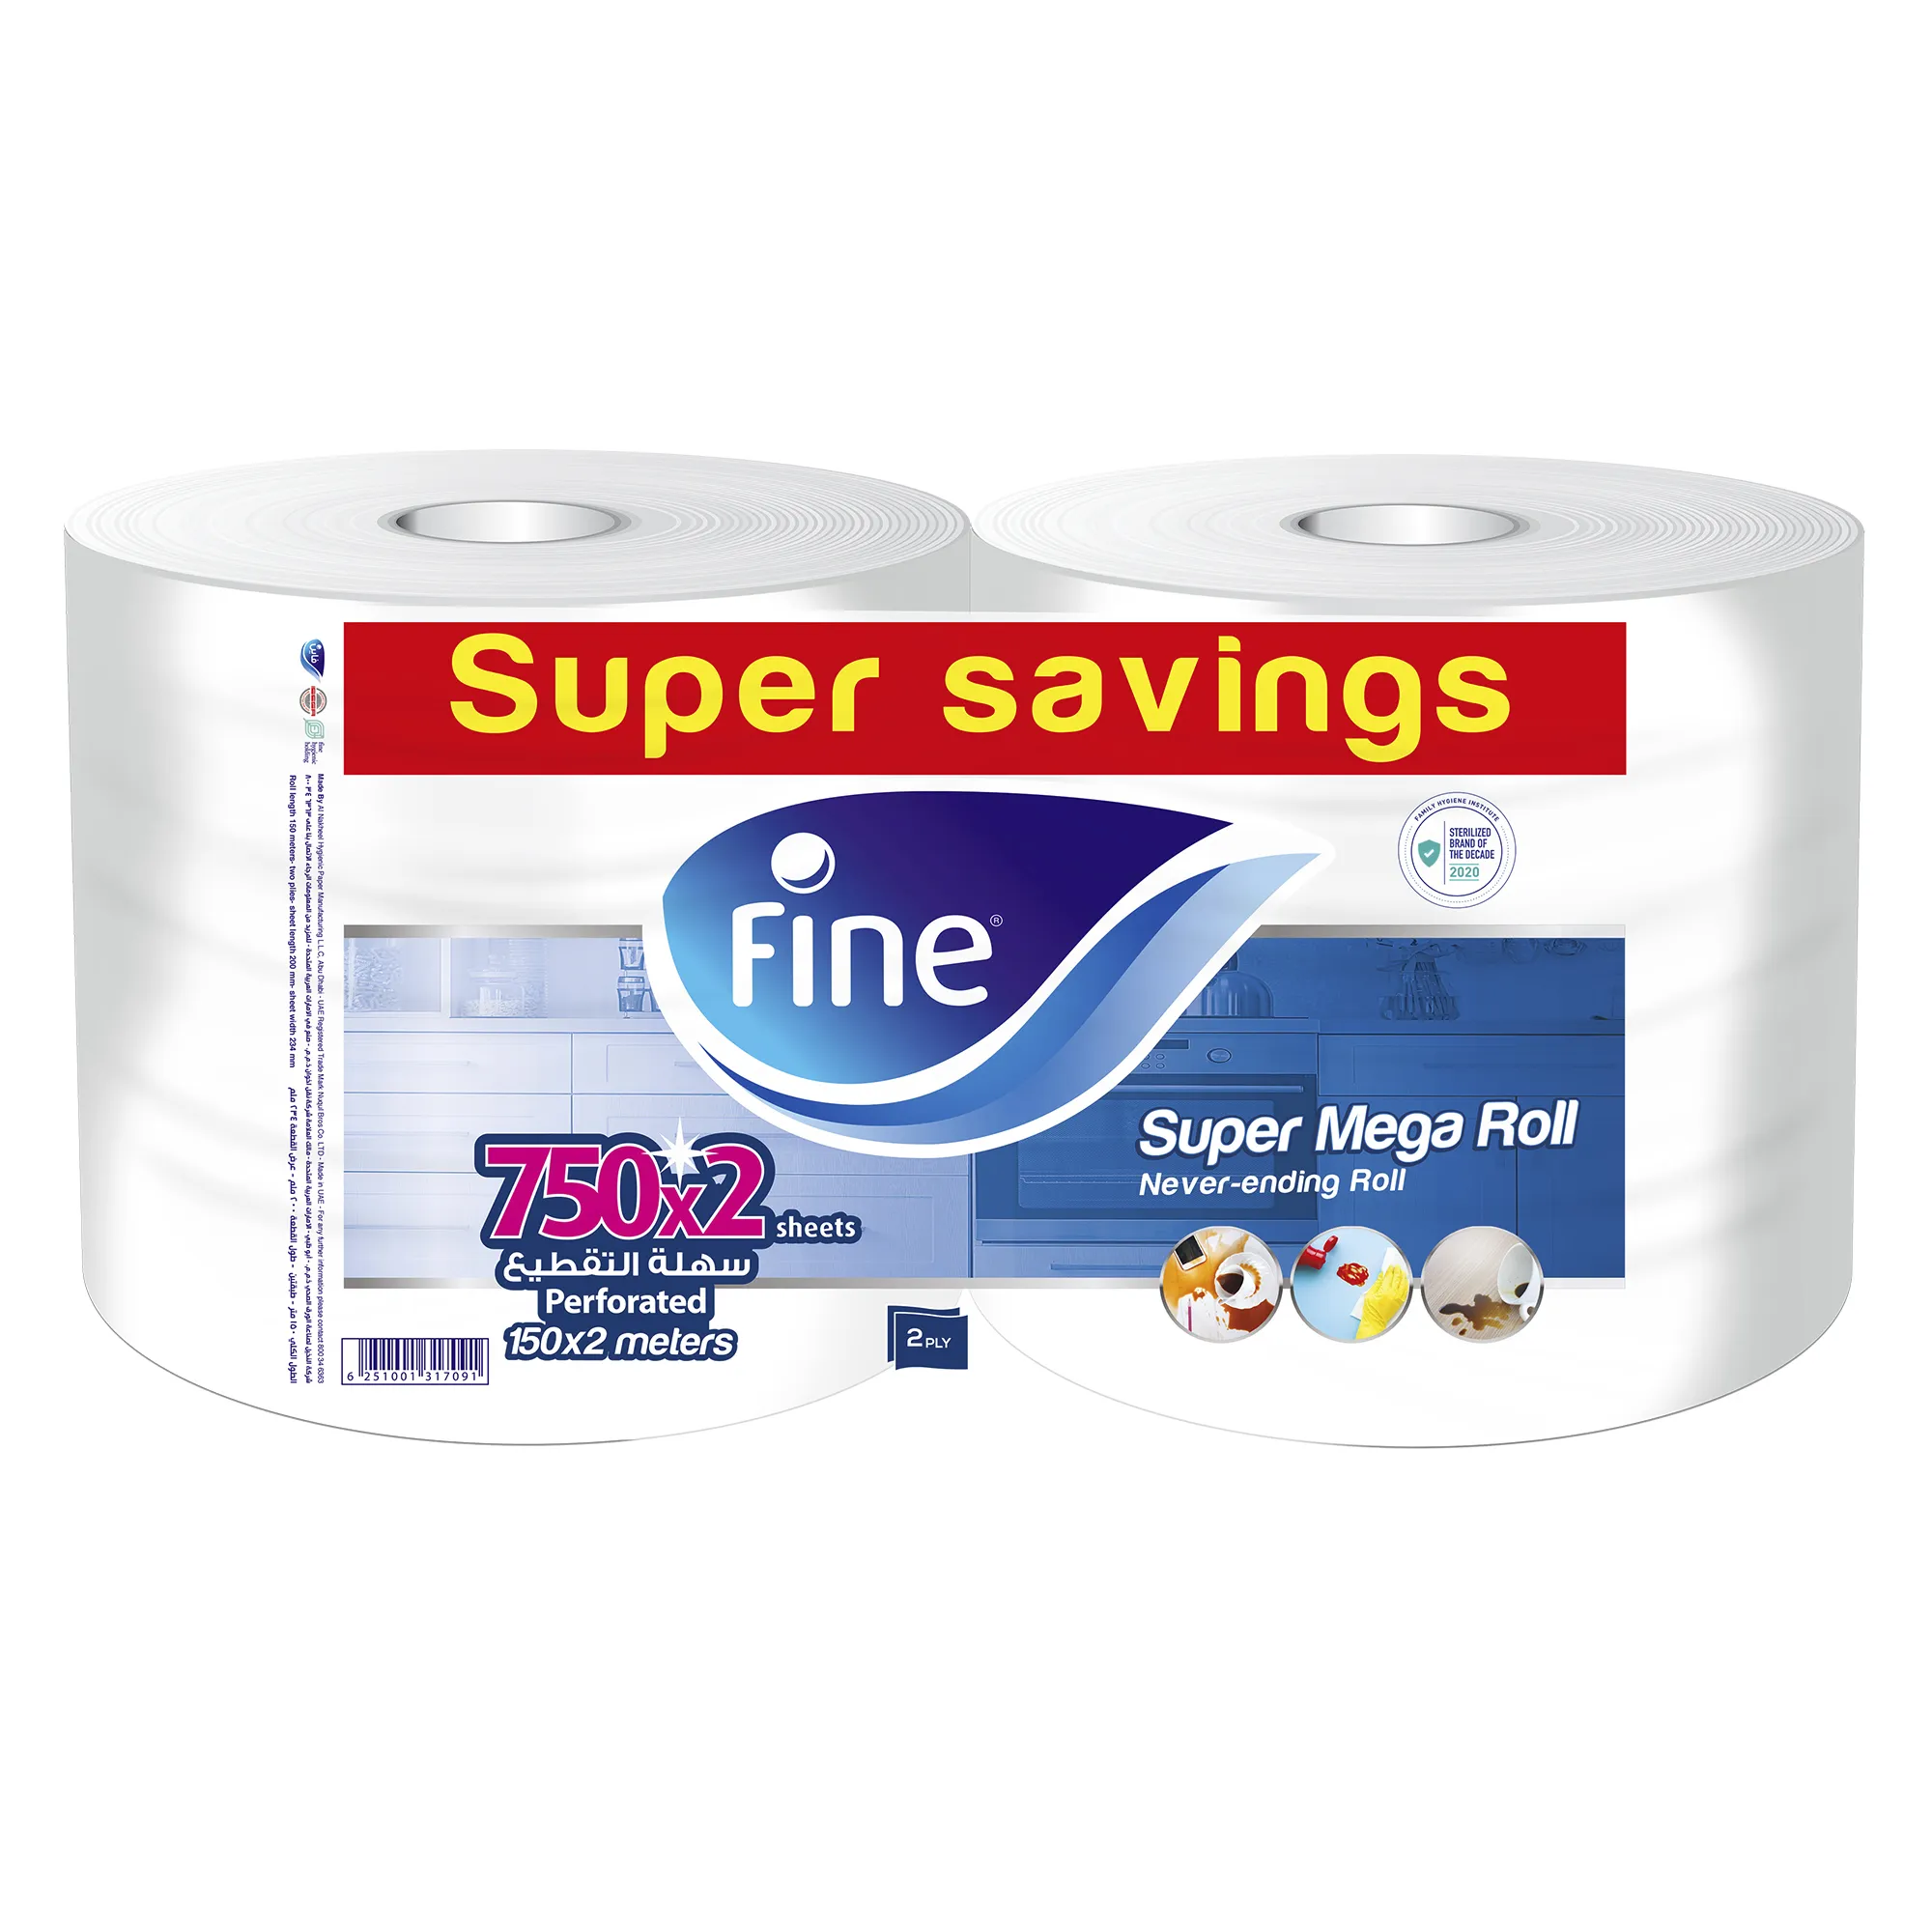 Fine, Paper Towel, Mega Roll, 750 Sheets, 2 Ply - Pack of 2